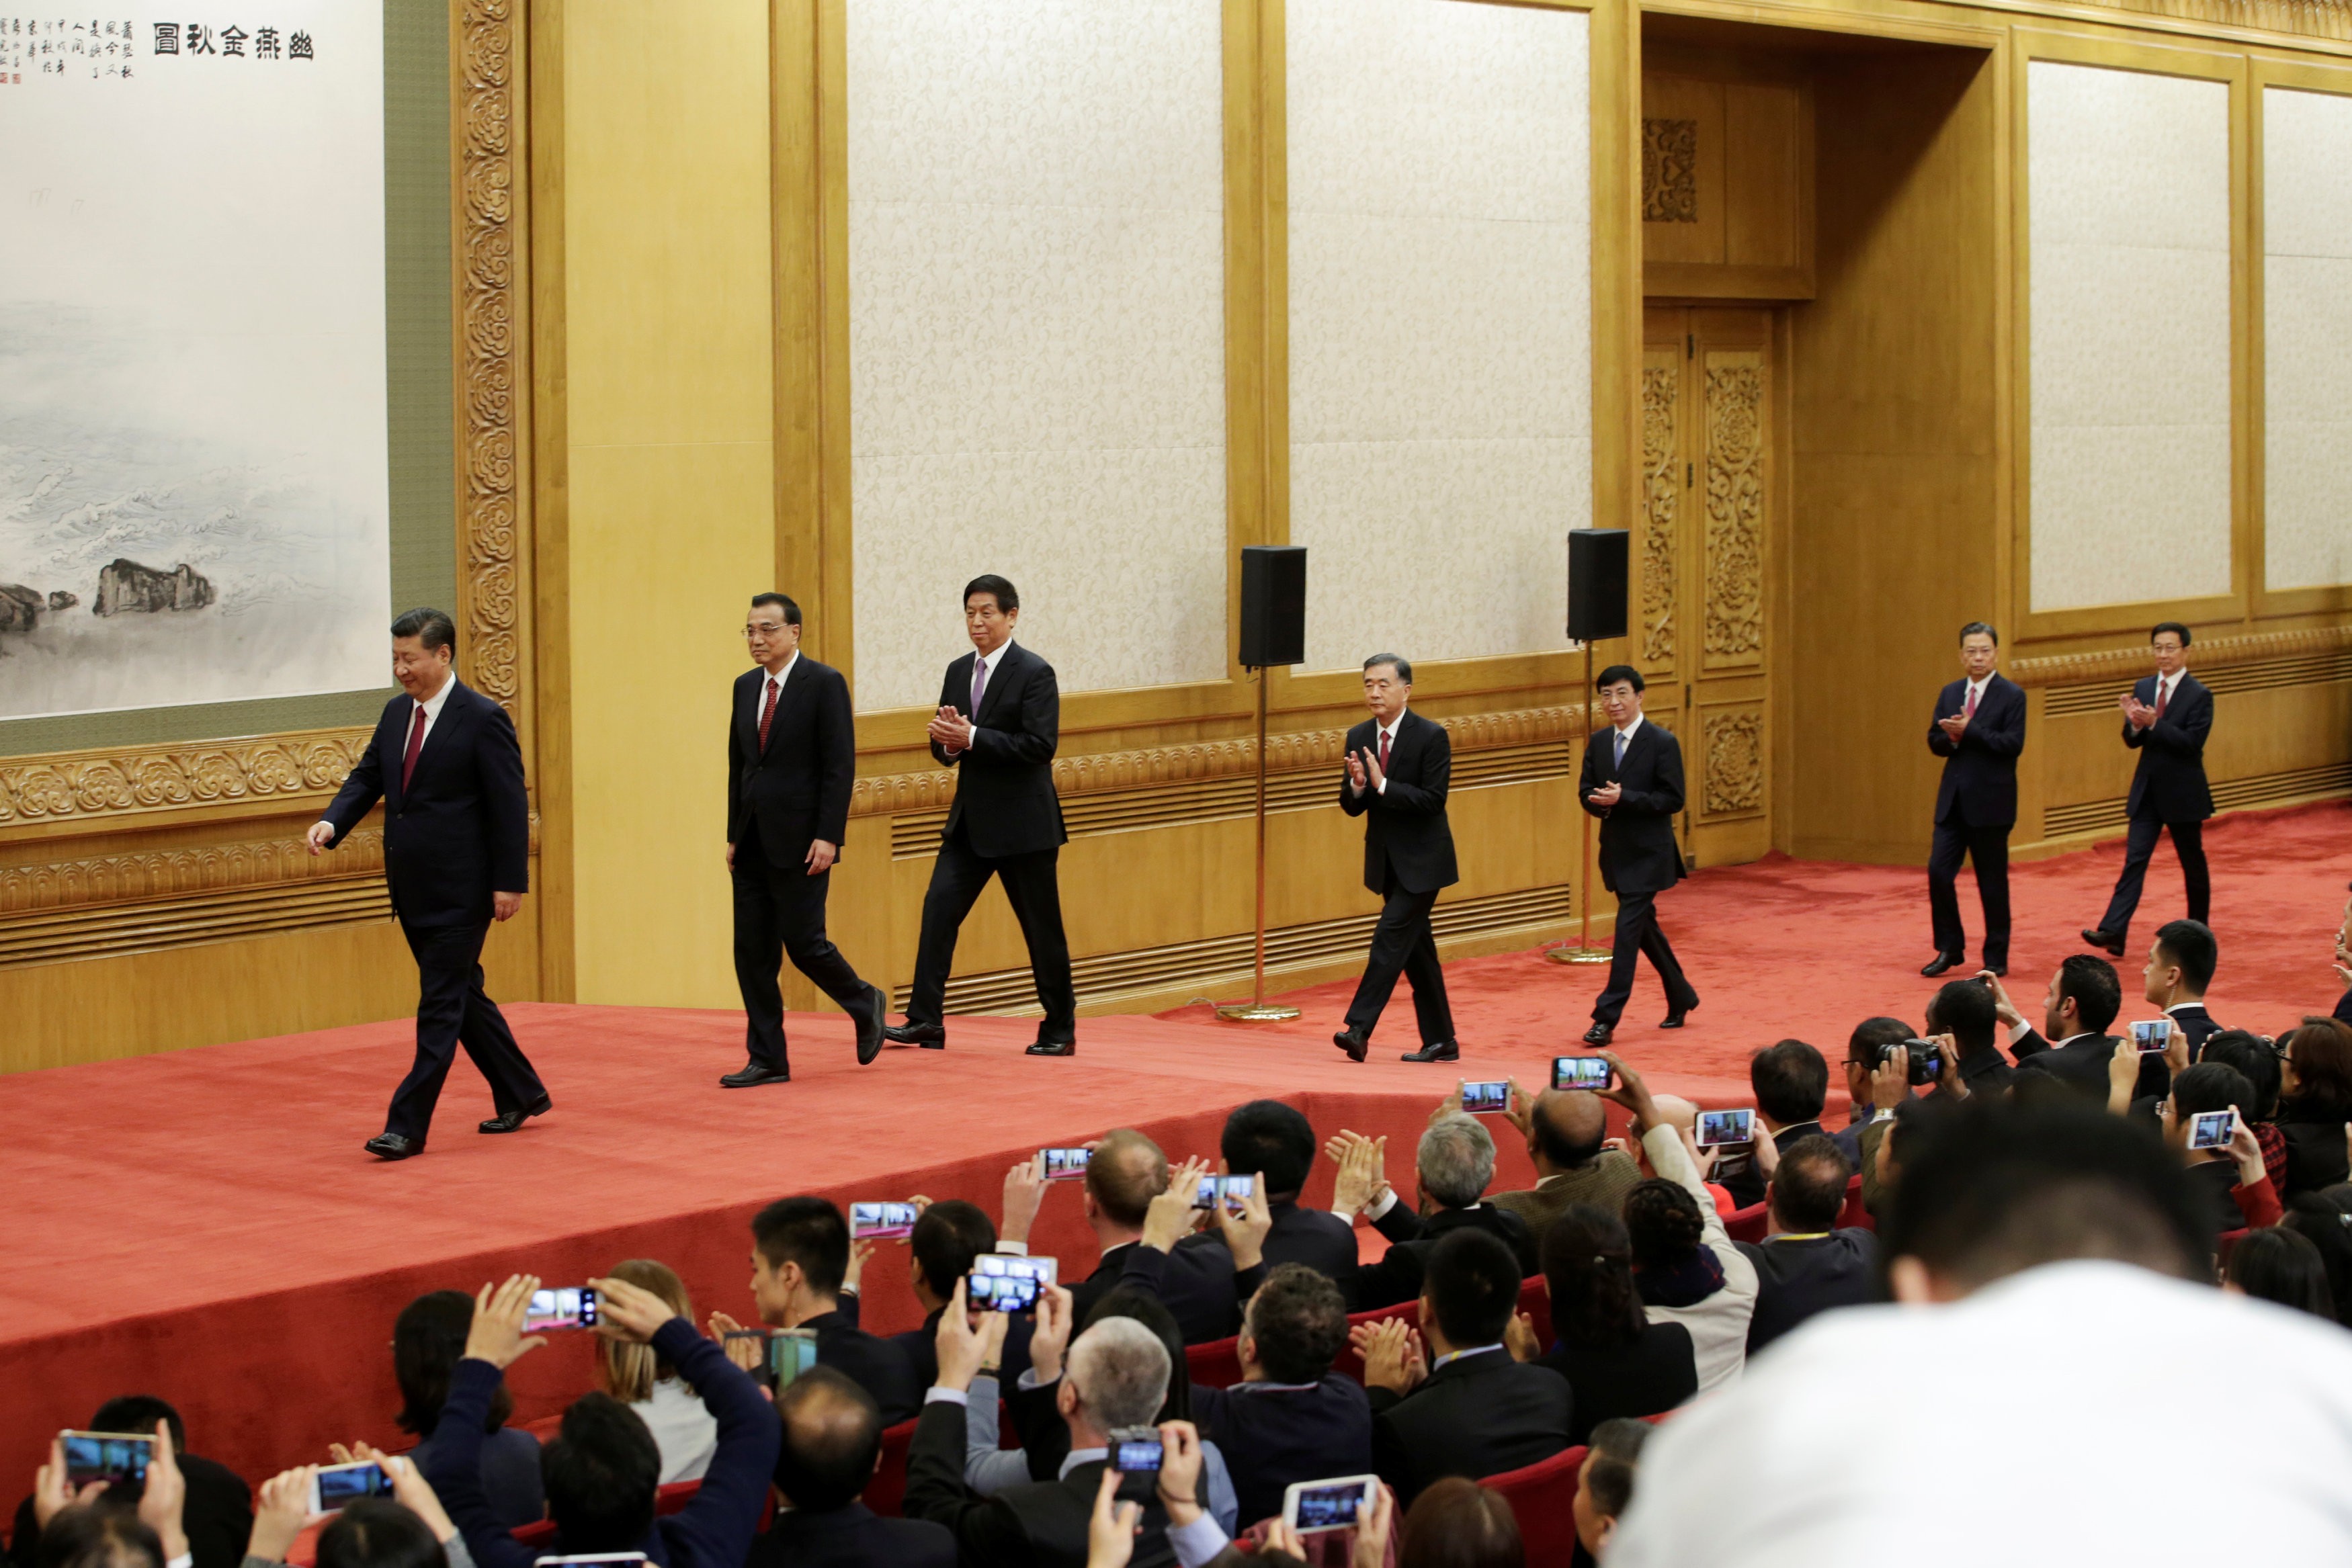 China's new Politburo Standing Committee members arrive to meet with the press at the Great Hall of the People in Beijing. Photo: Reuters